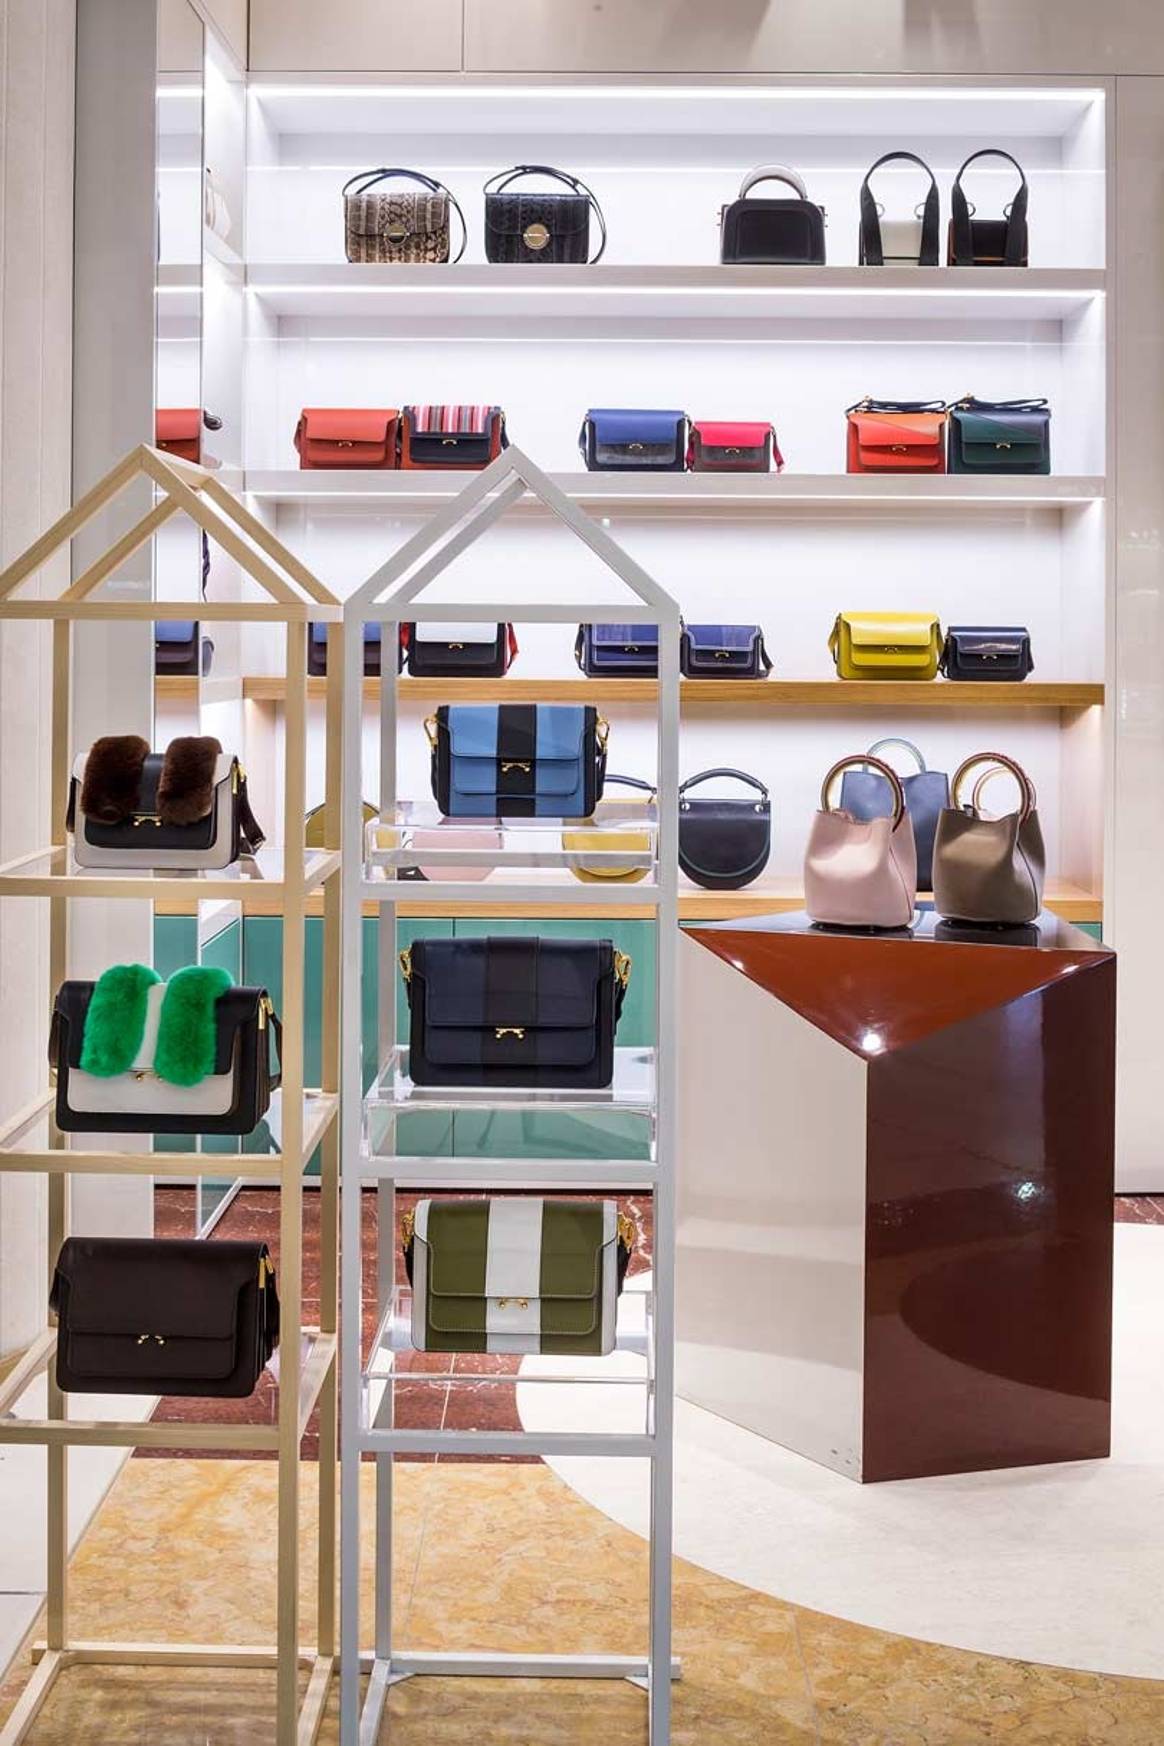 In Pictures: Marni launches accessories concept